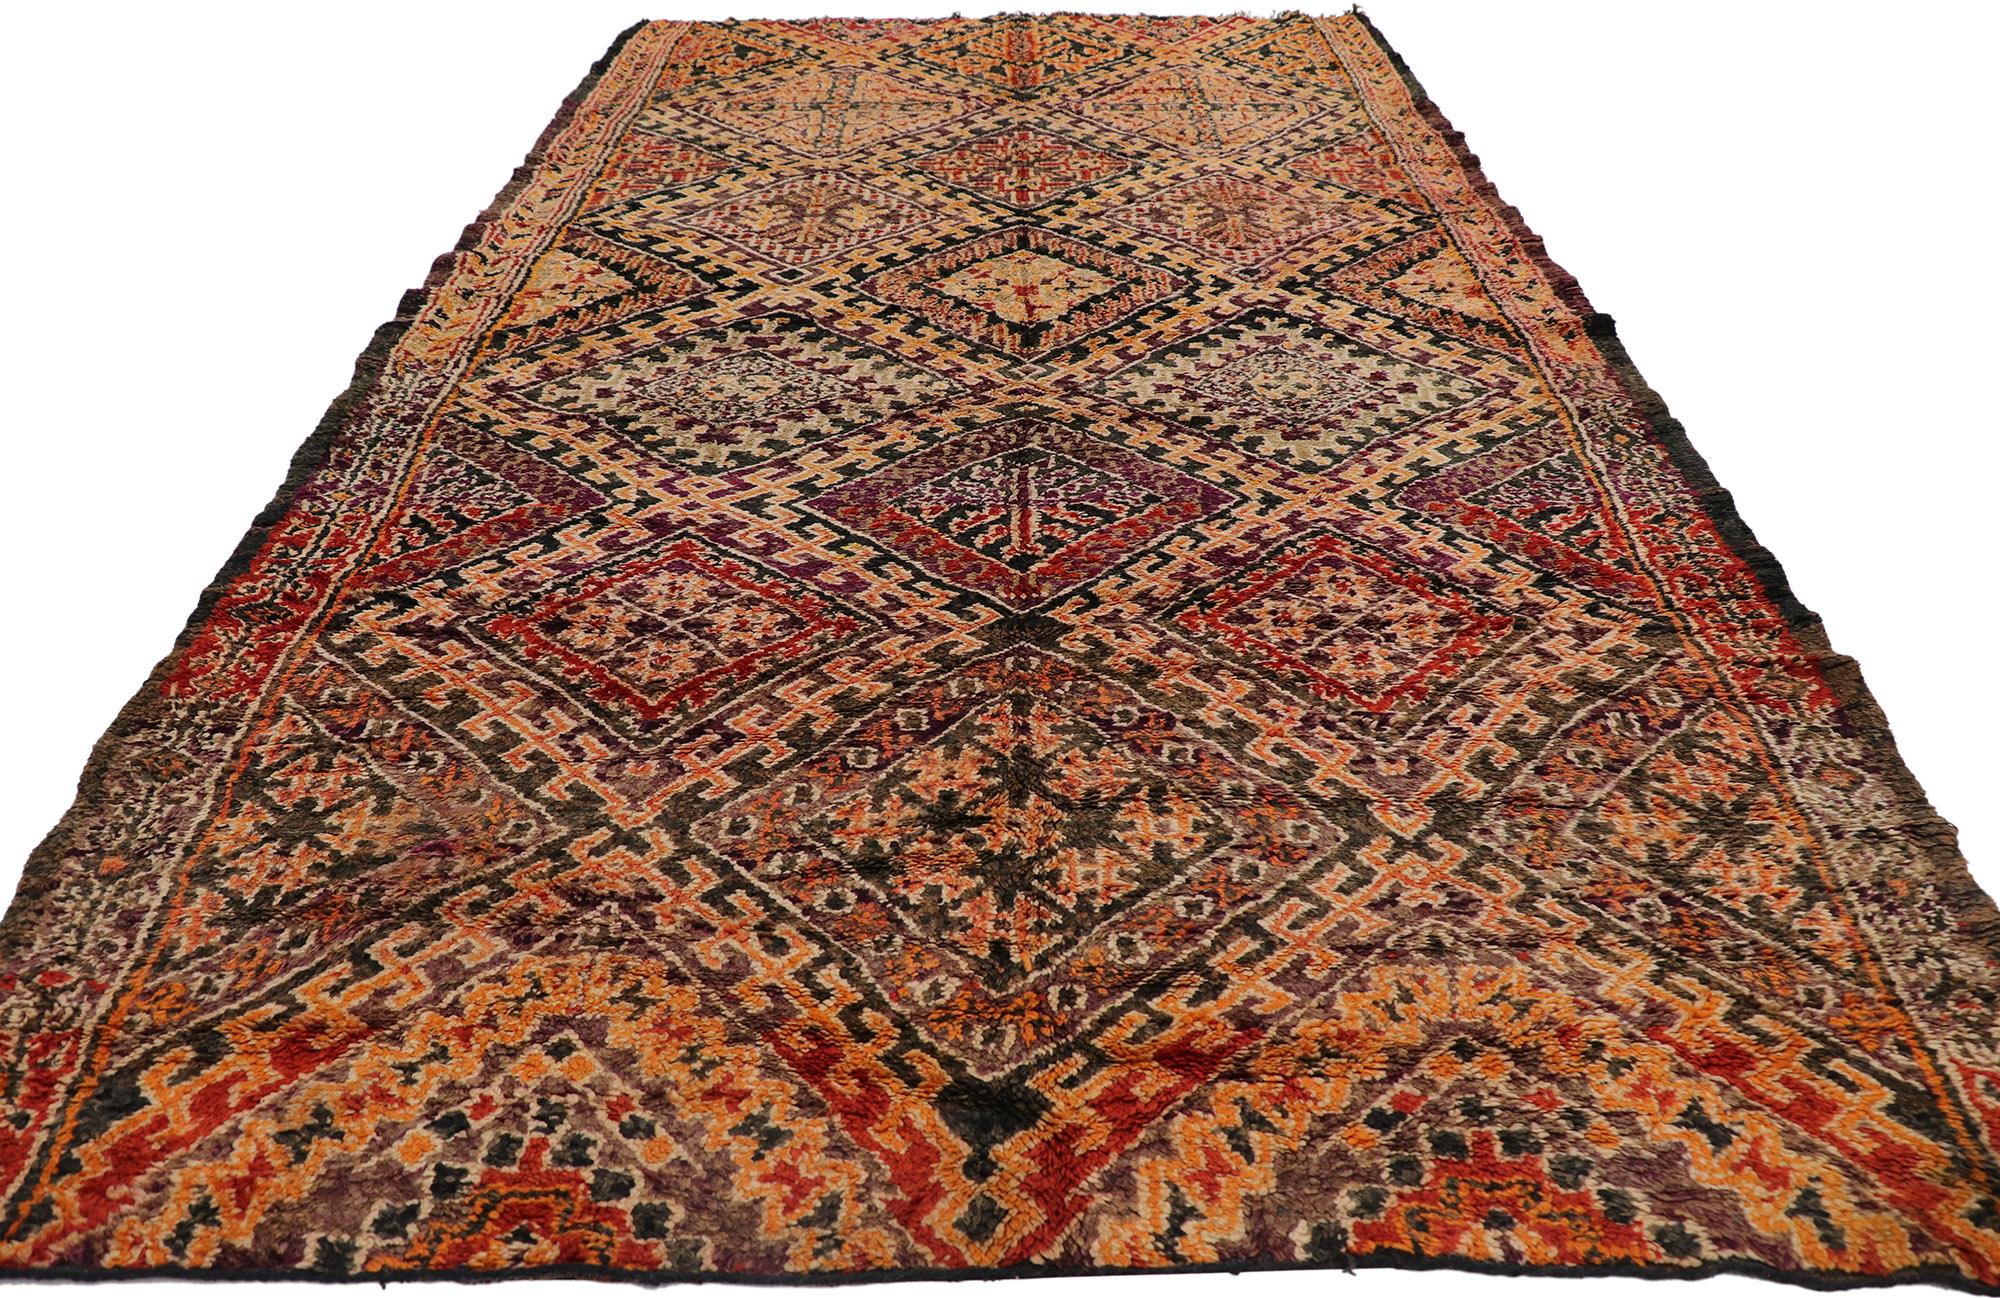 Tribal Vintage Berber Beni M'Guild Moroccan Rug with Mid-Century Modern Style For Sale